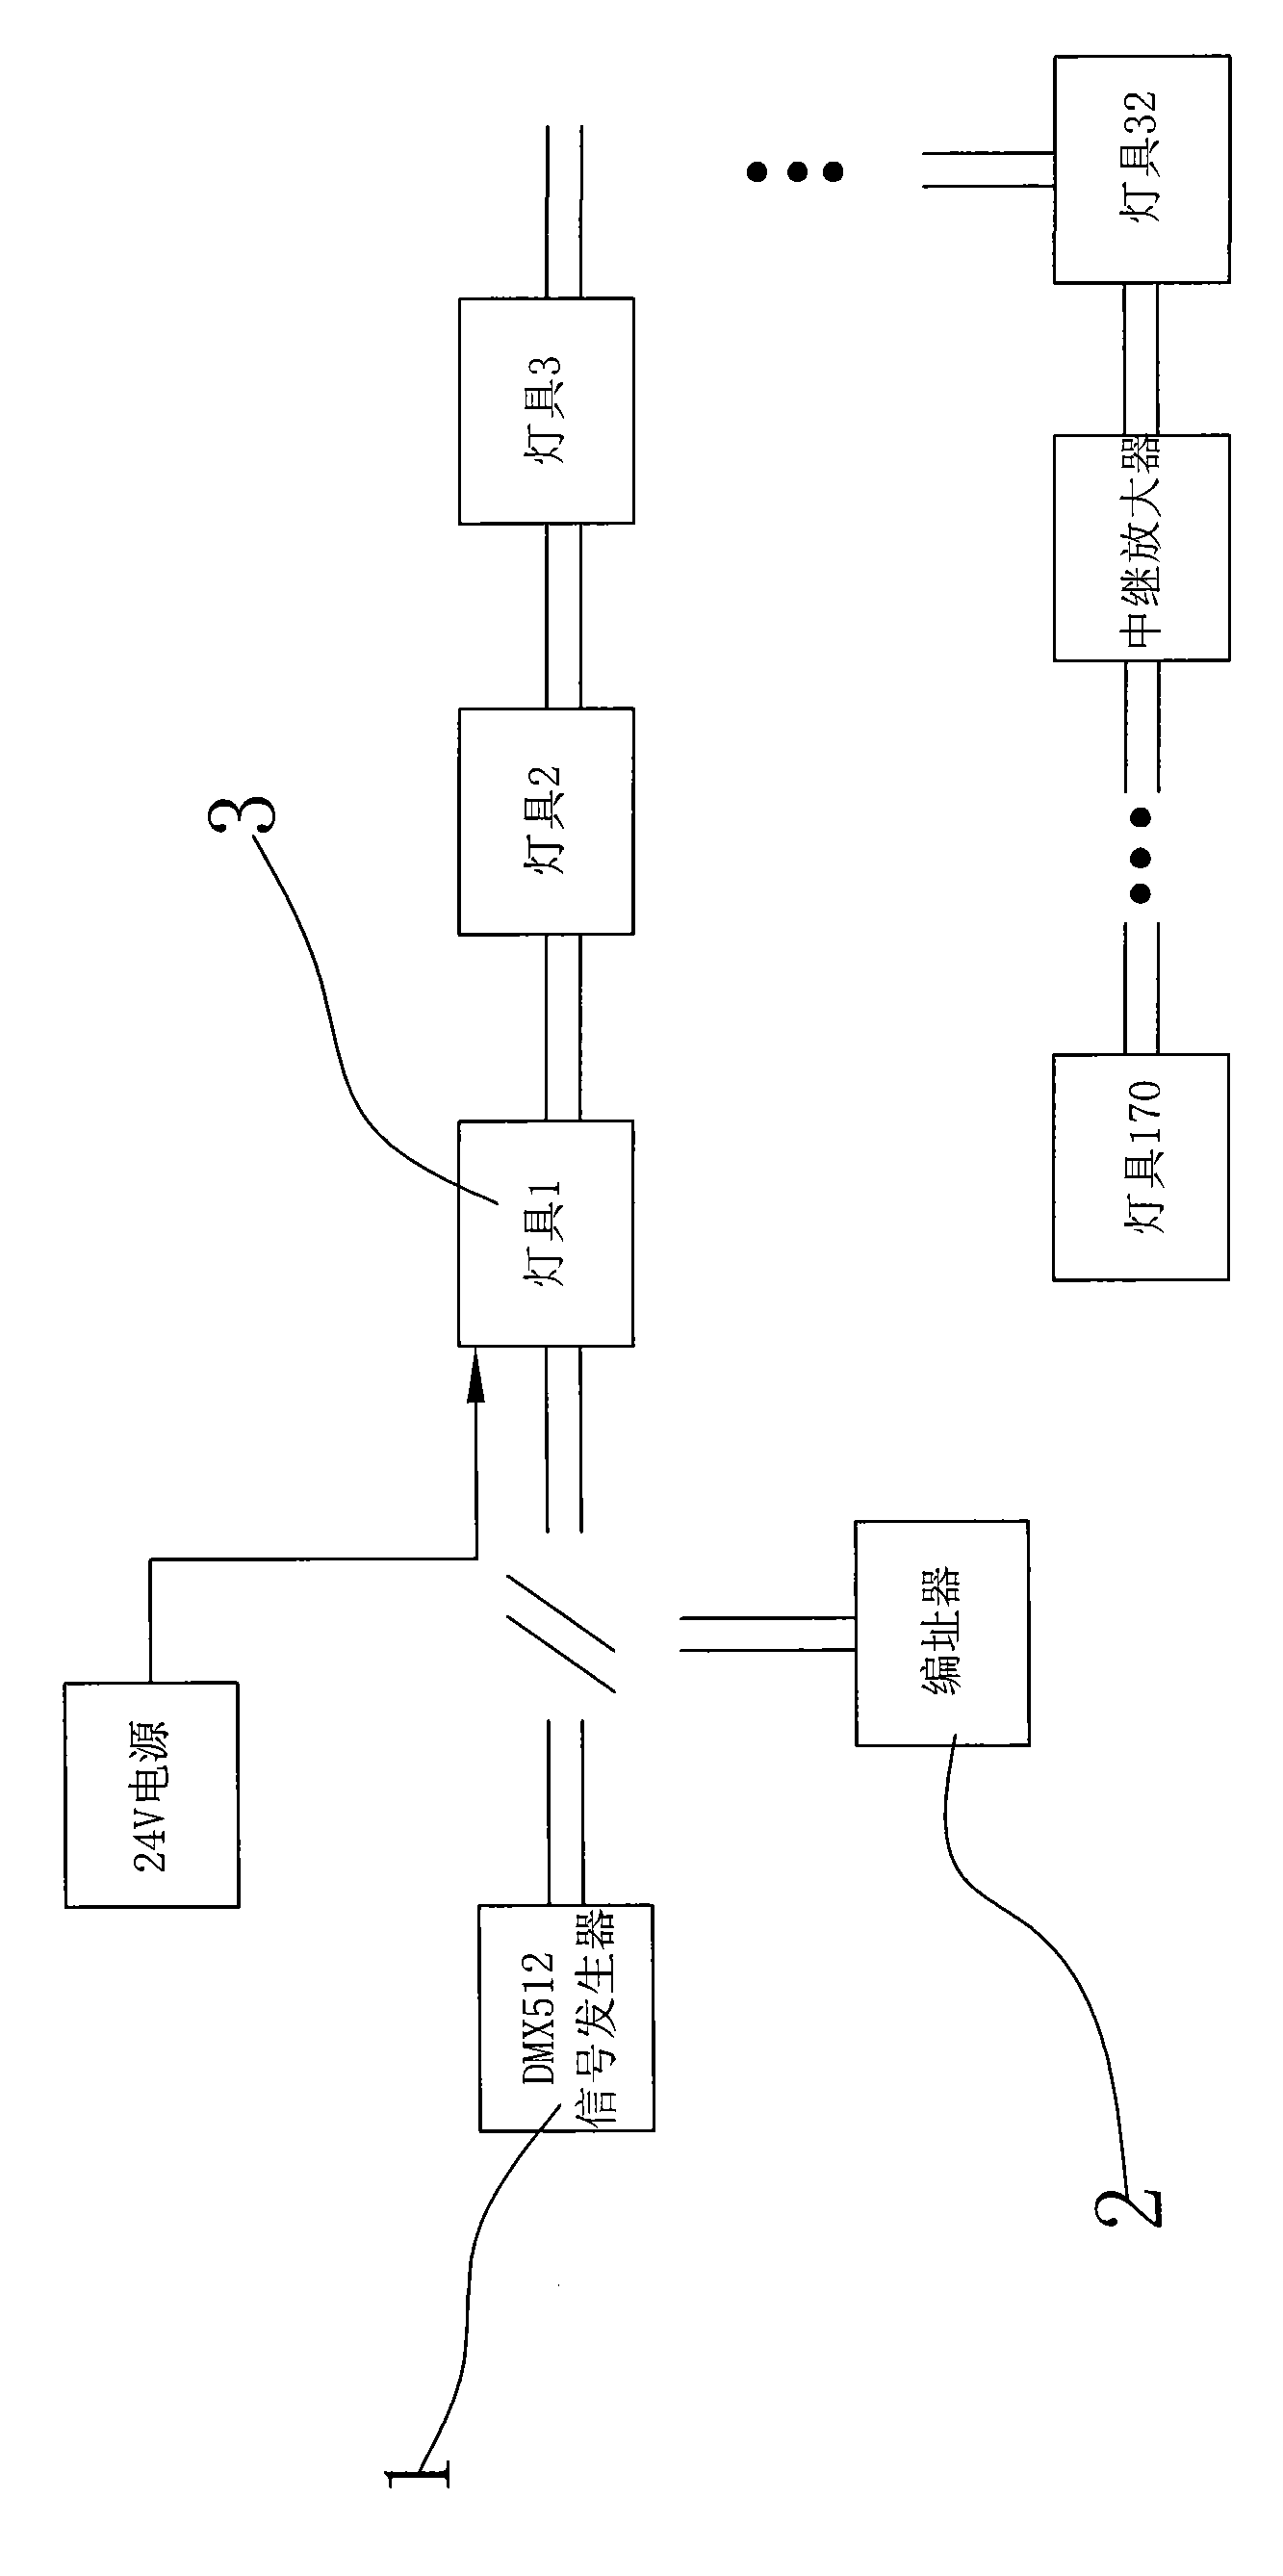 Intelligent LED lamp controller and control method